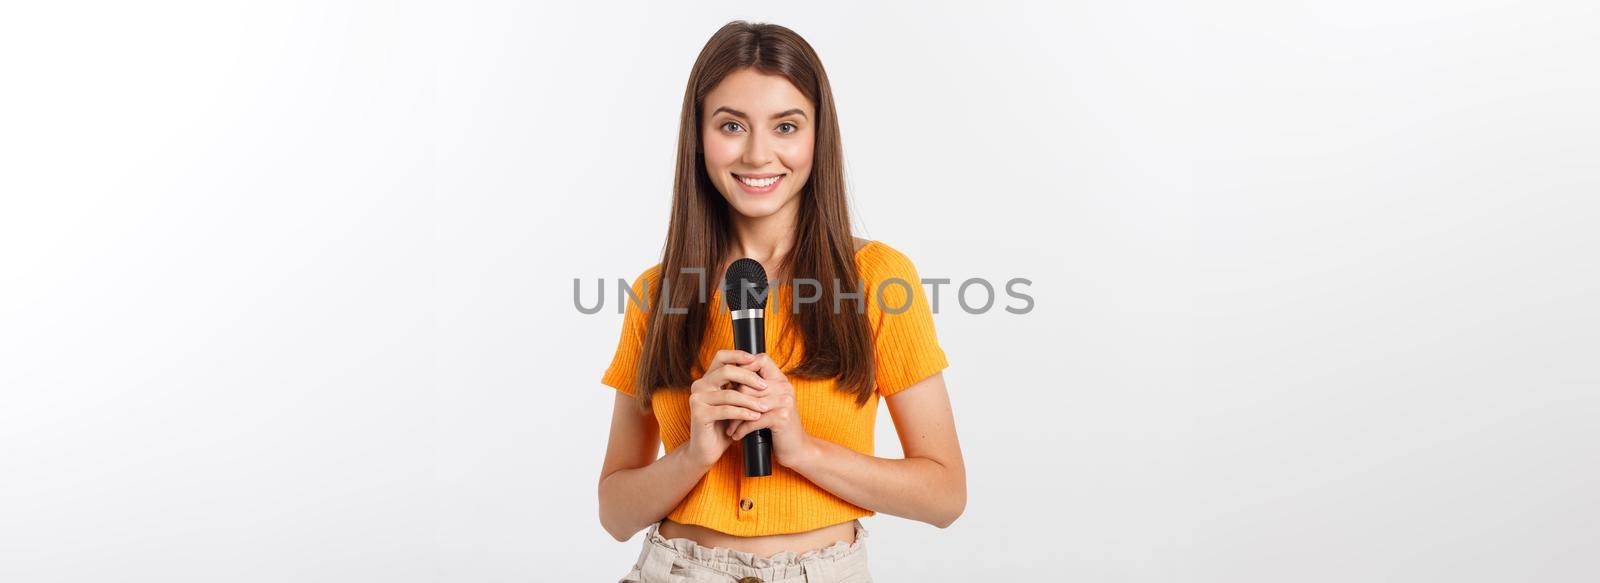 Young pretty woman happy and motivated, singing a song with a microphone, presenting an event or having a party, enjoy the moment.